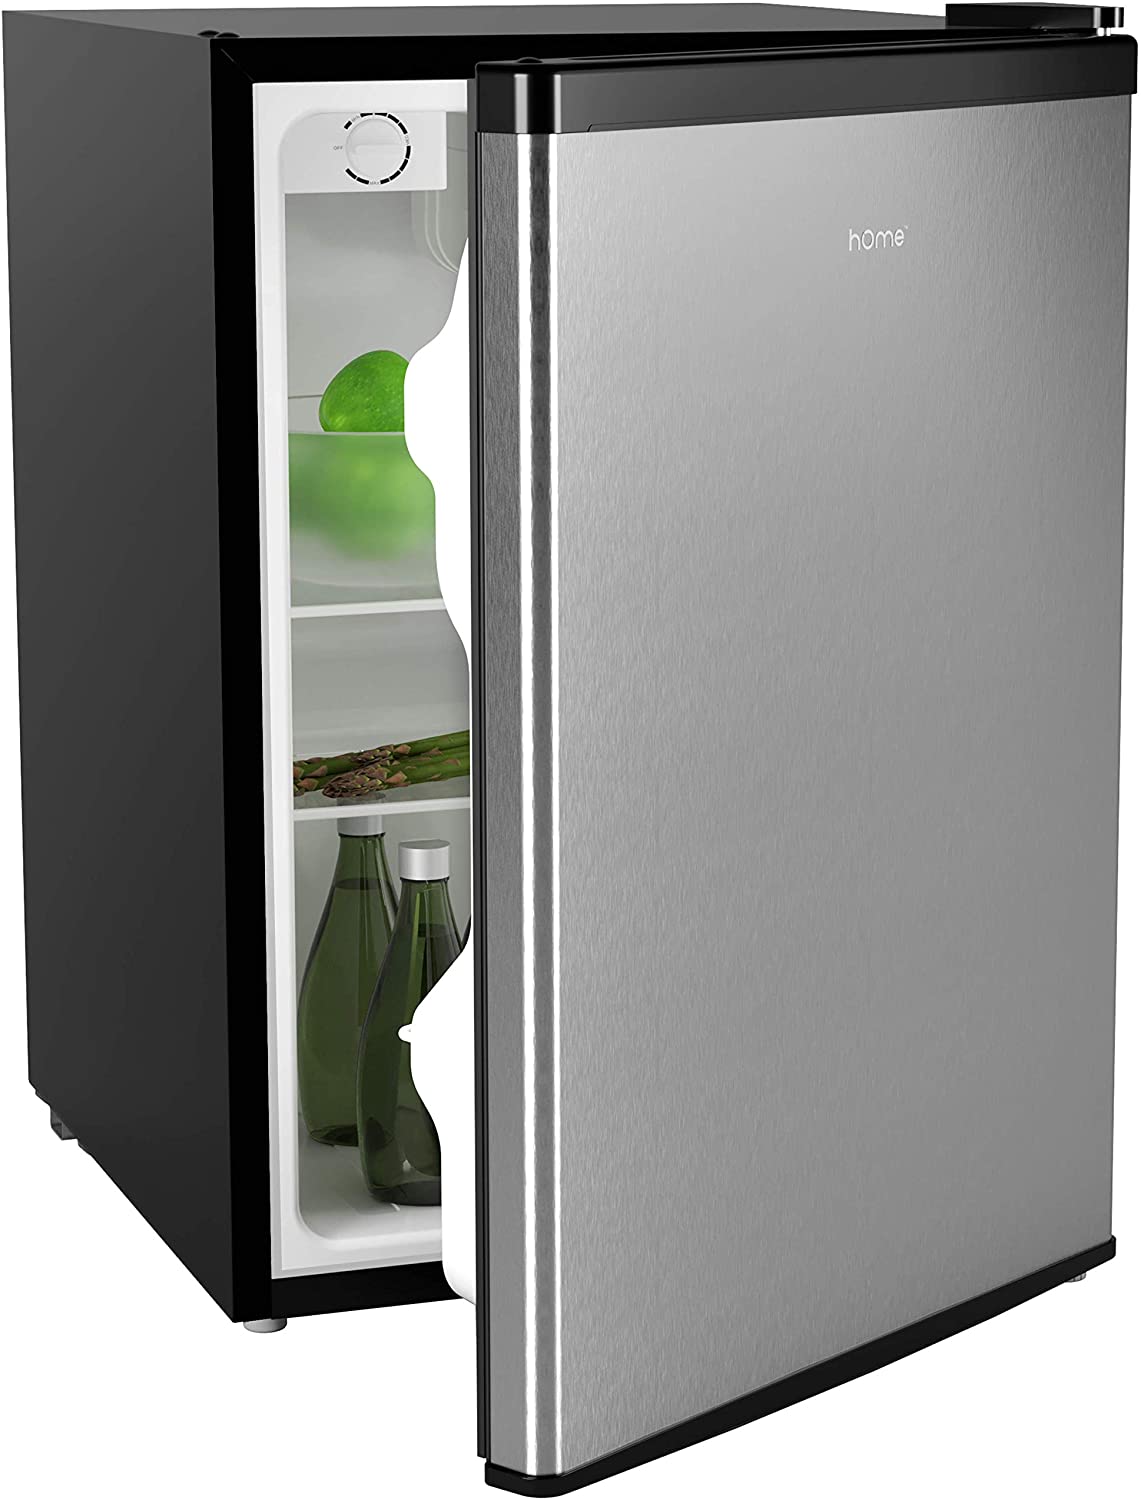 hOmeLabs Mini Fridge With Chiller Compartment